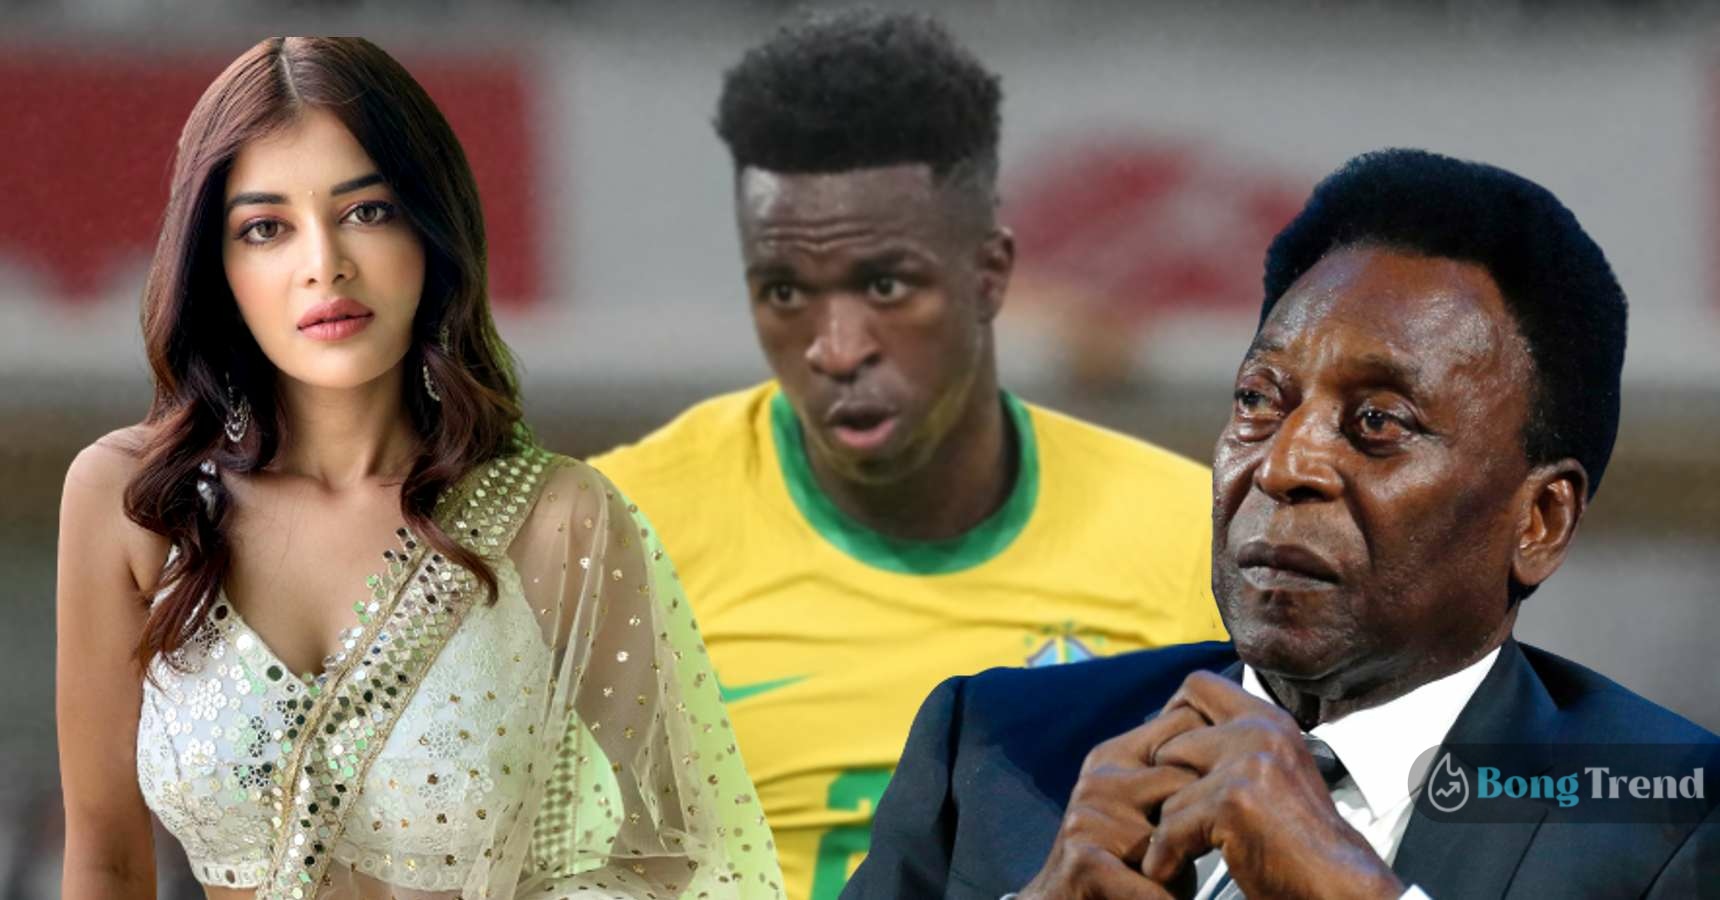 Madhumita Sarcar trolled after posting RIP for Pele with brazilian player vinicius junior picture who is alive